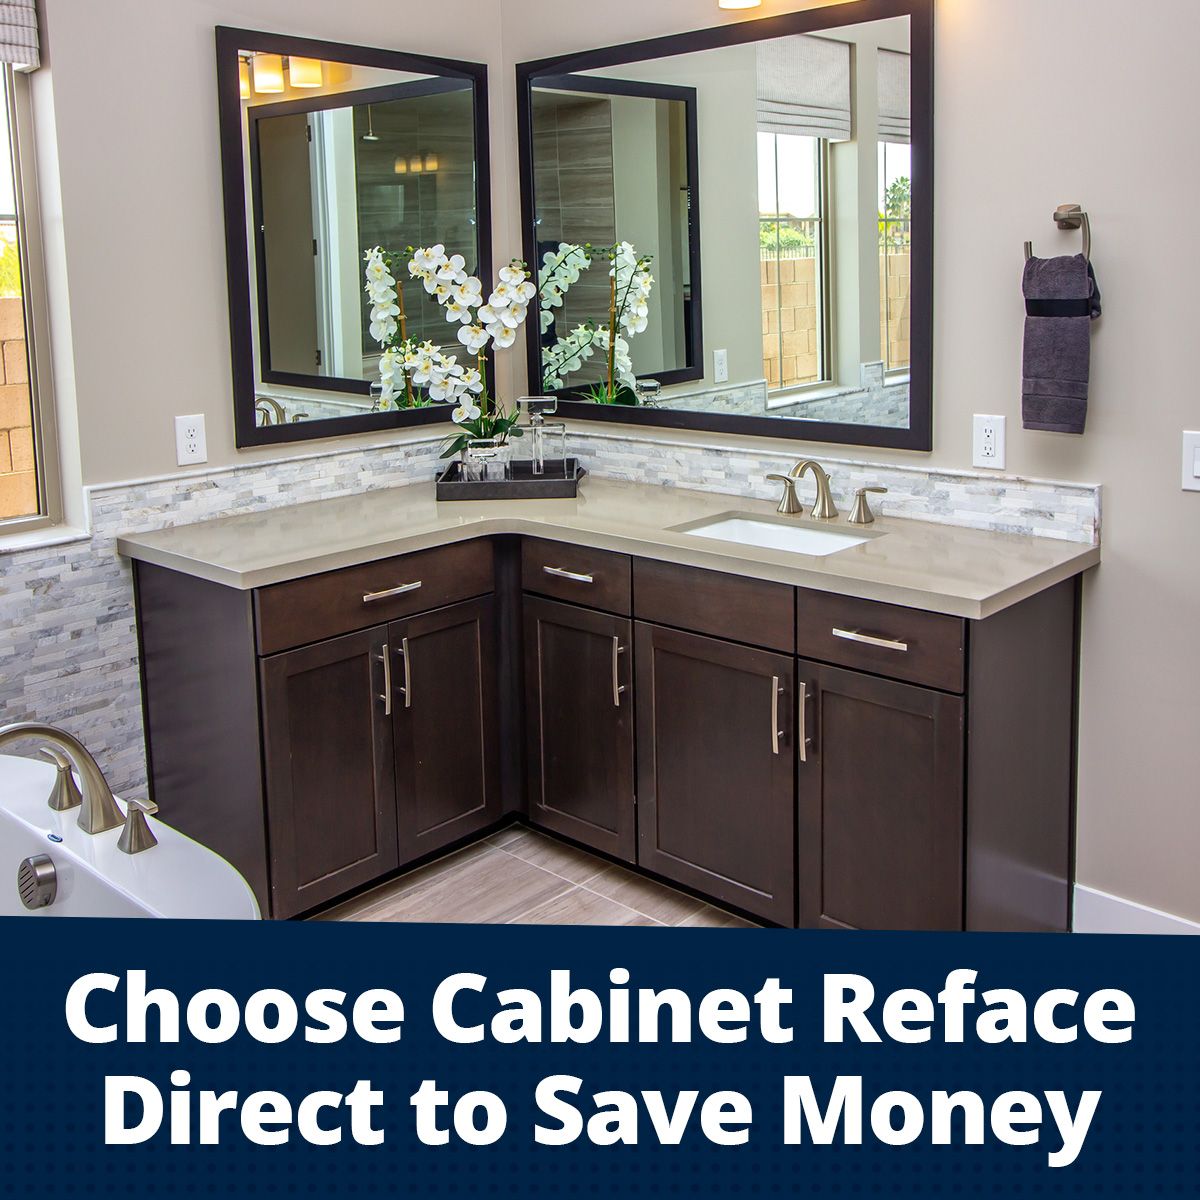 Choose Cabinet Reface Direct to Save Money